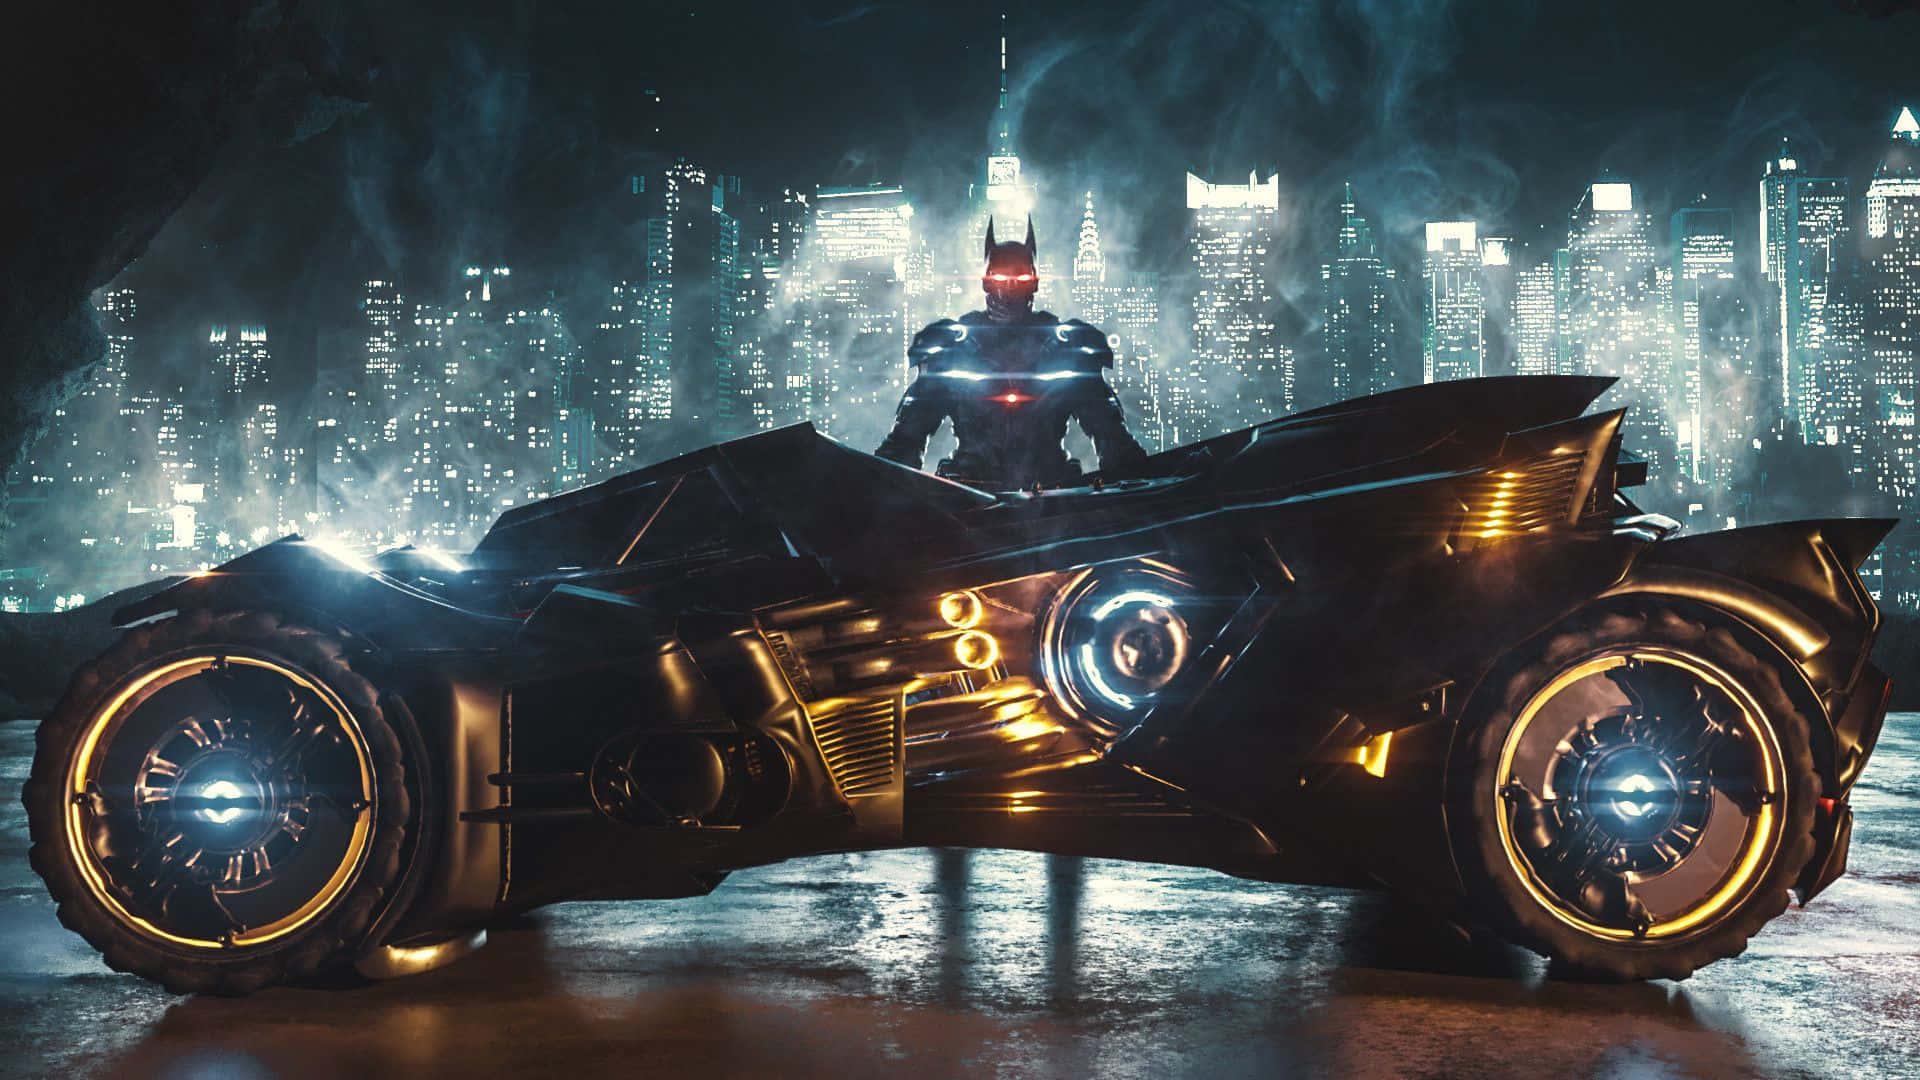 Impressive Display Of The Batman Car With Powerful Yellow Lights Background